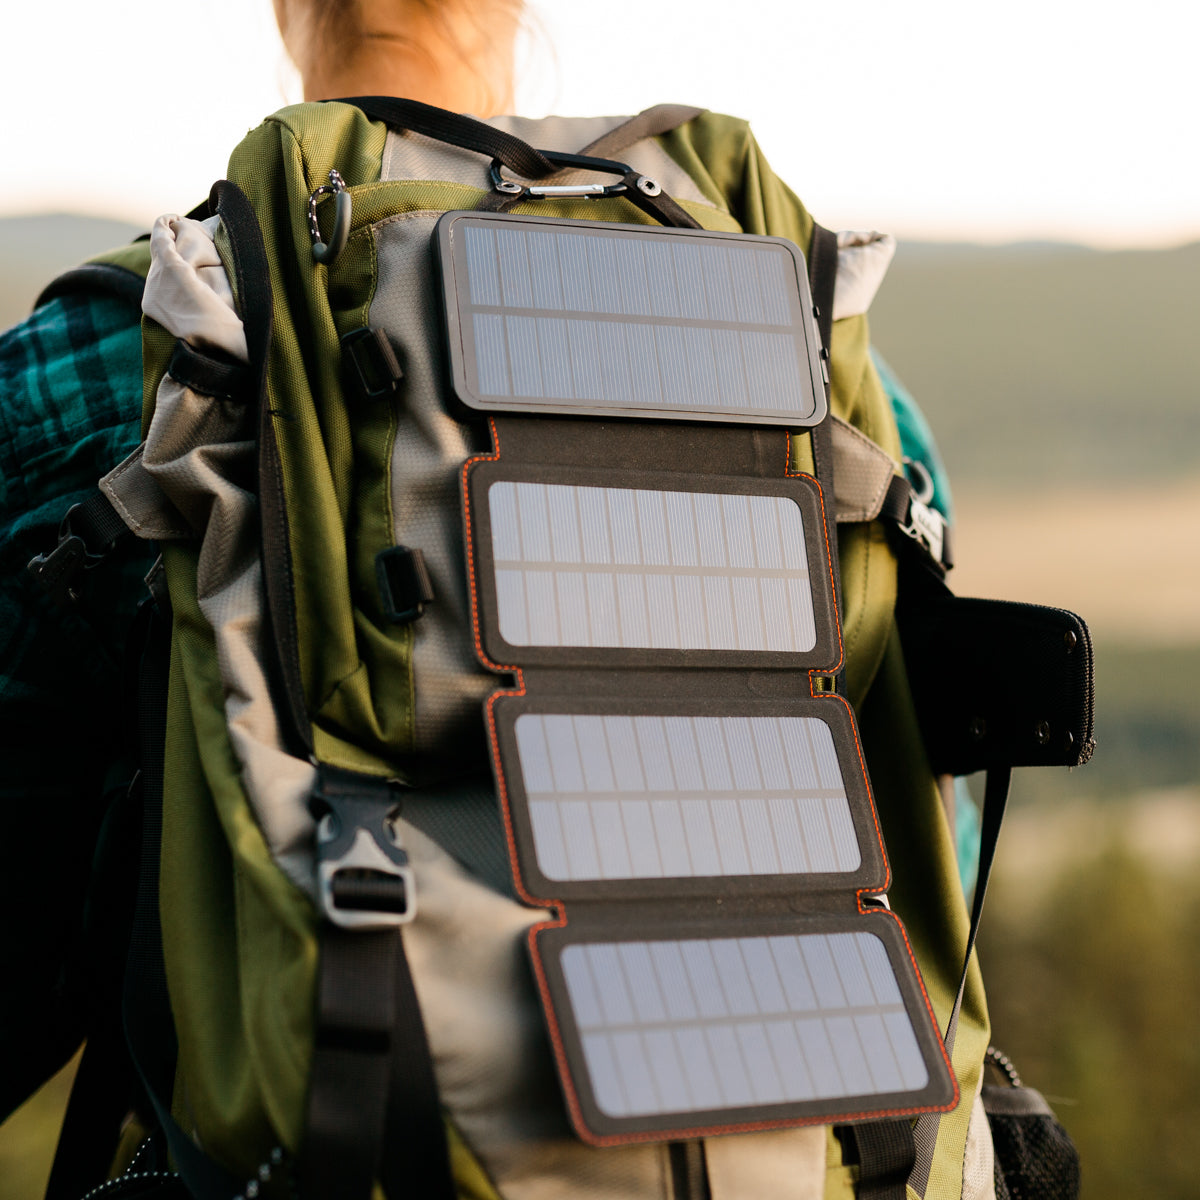 QuadraPro Solar Power Bank Charging in sun clipped to back of backpack